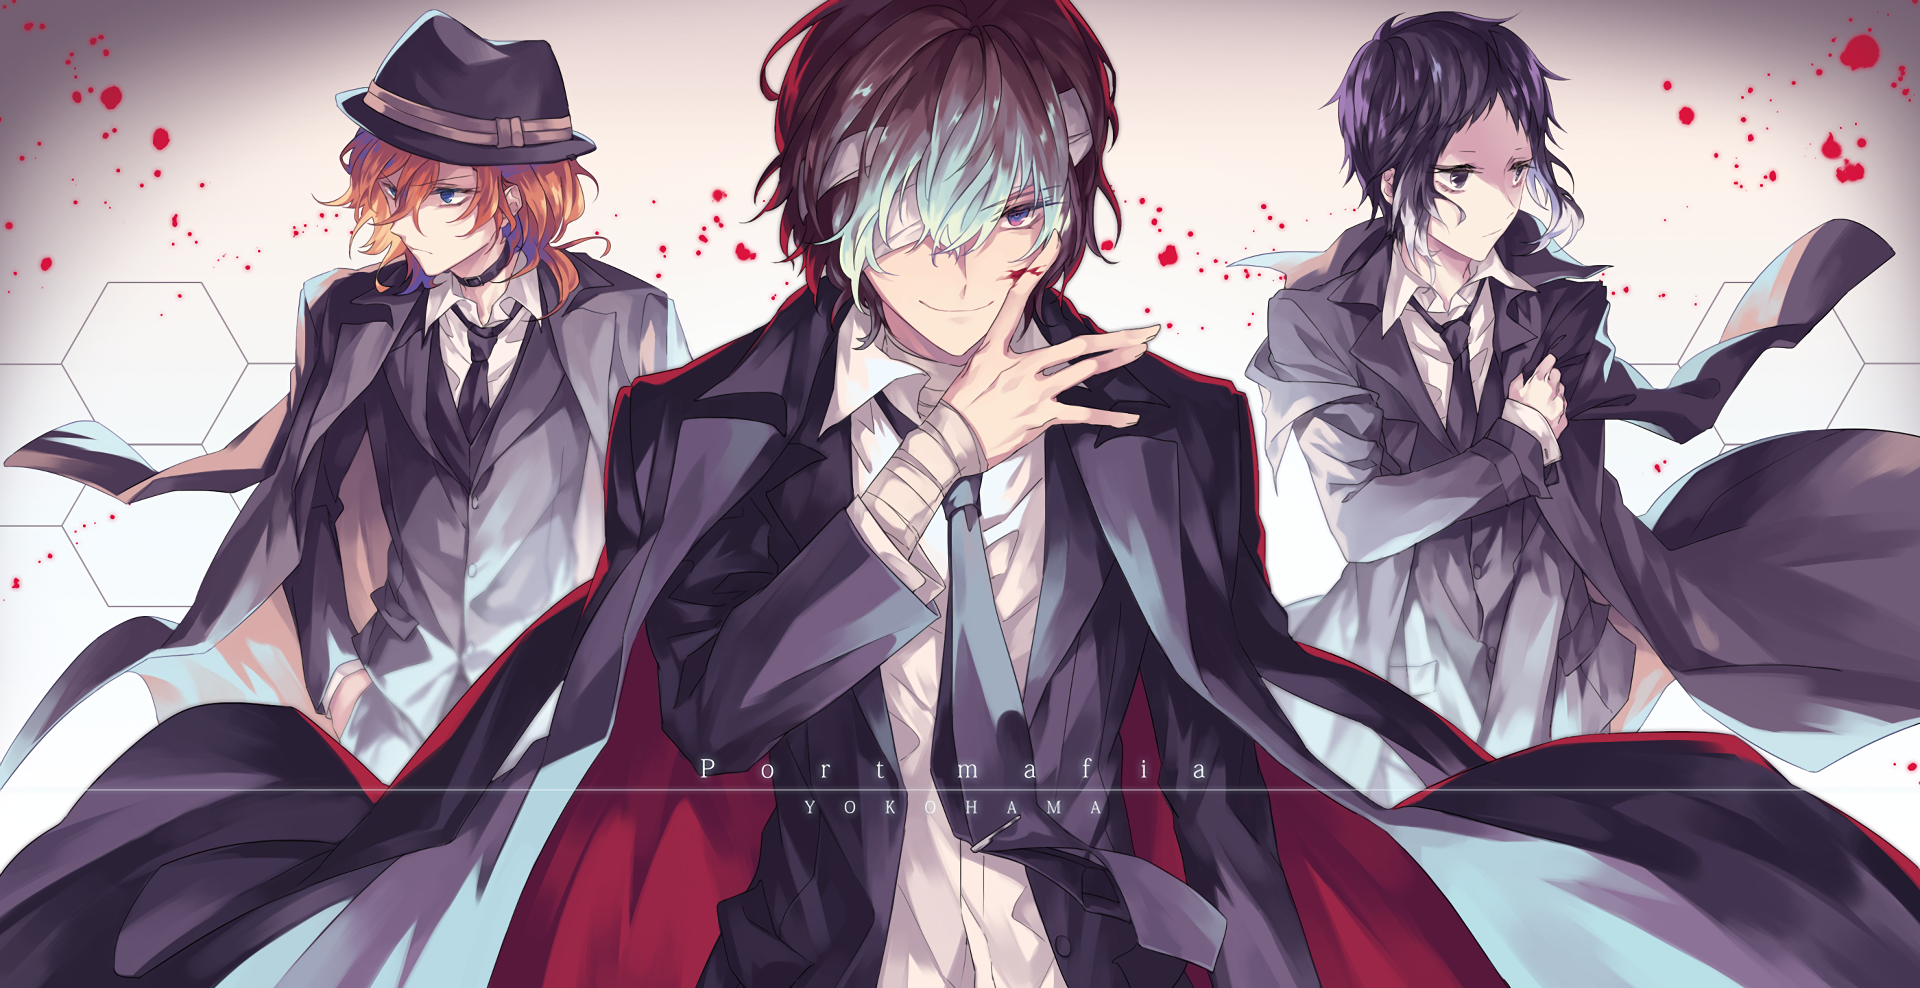 Bungou Stray Dogs Wallpaper and Background Image | 1920x988 | ID:739891